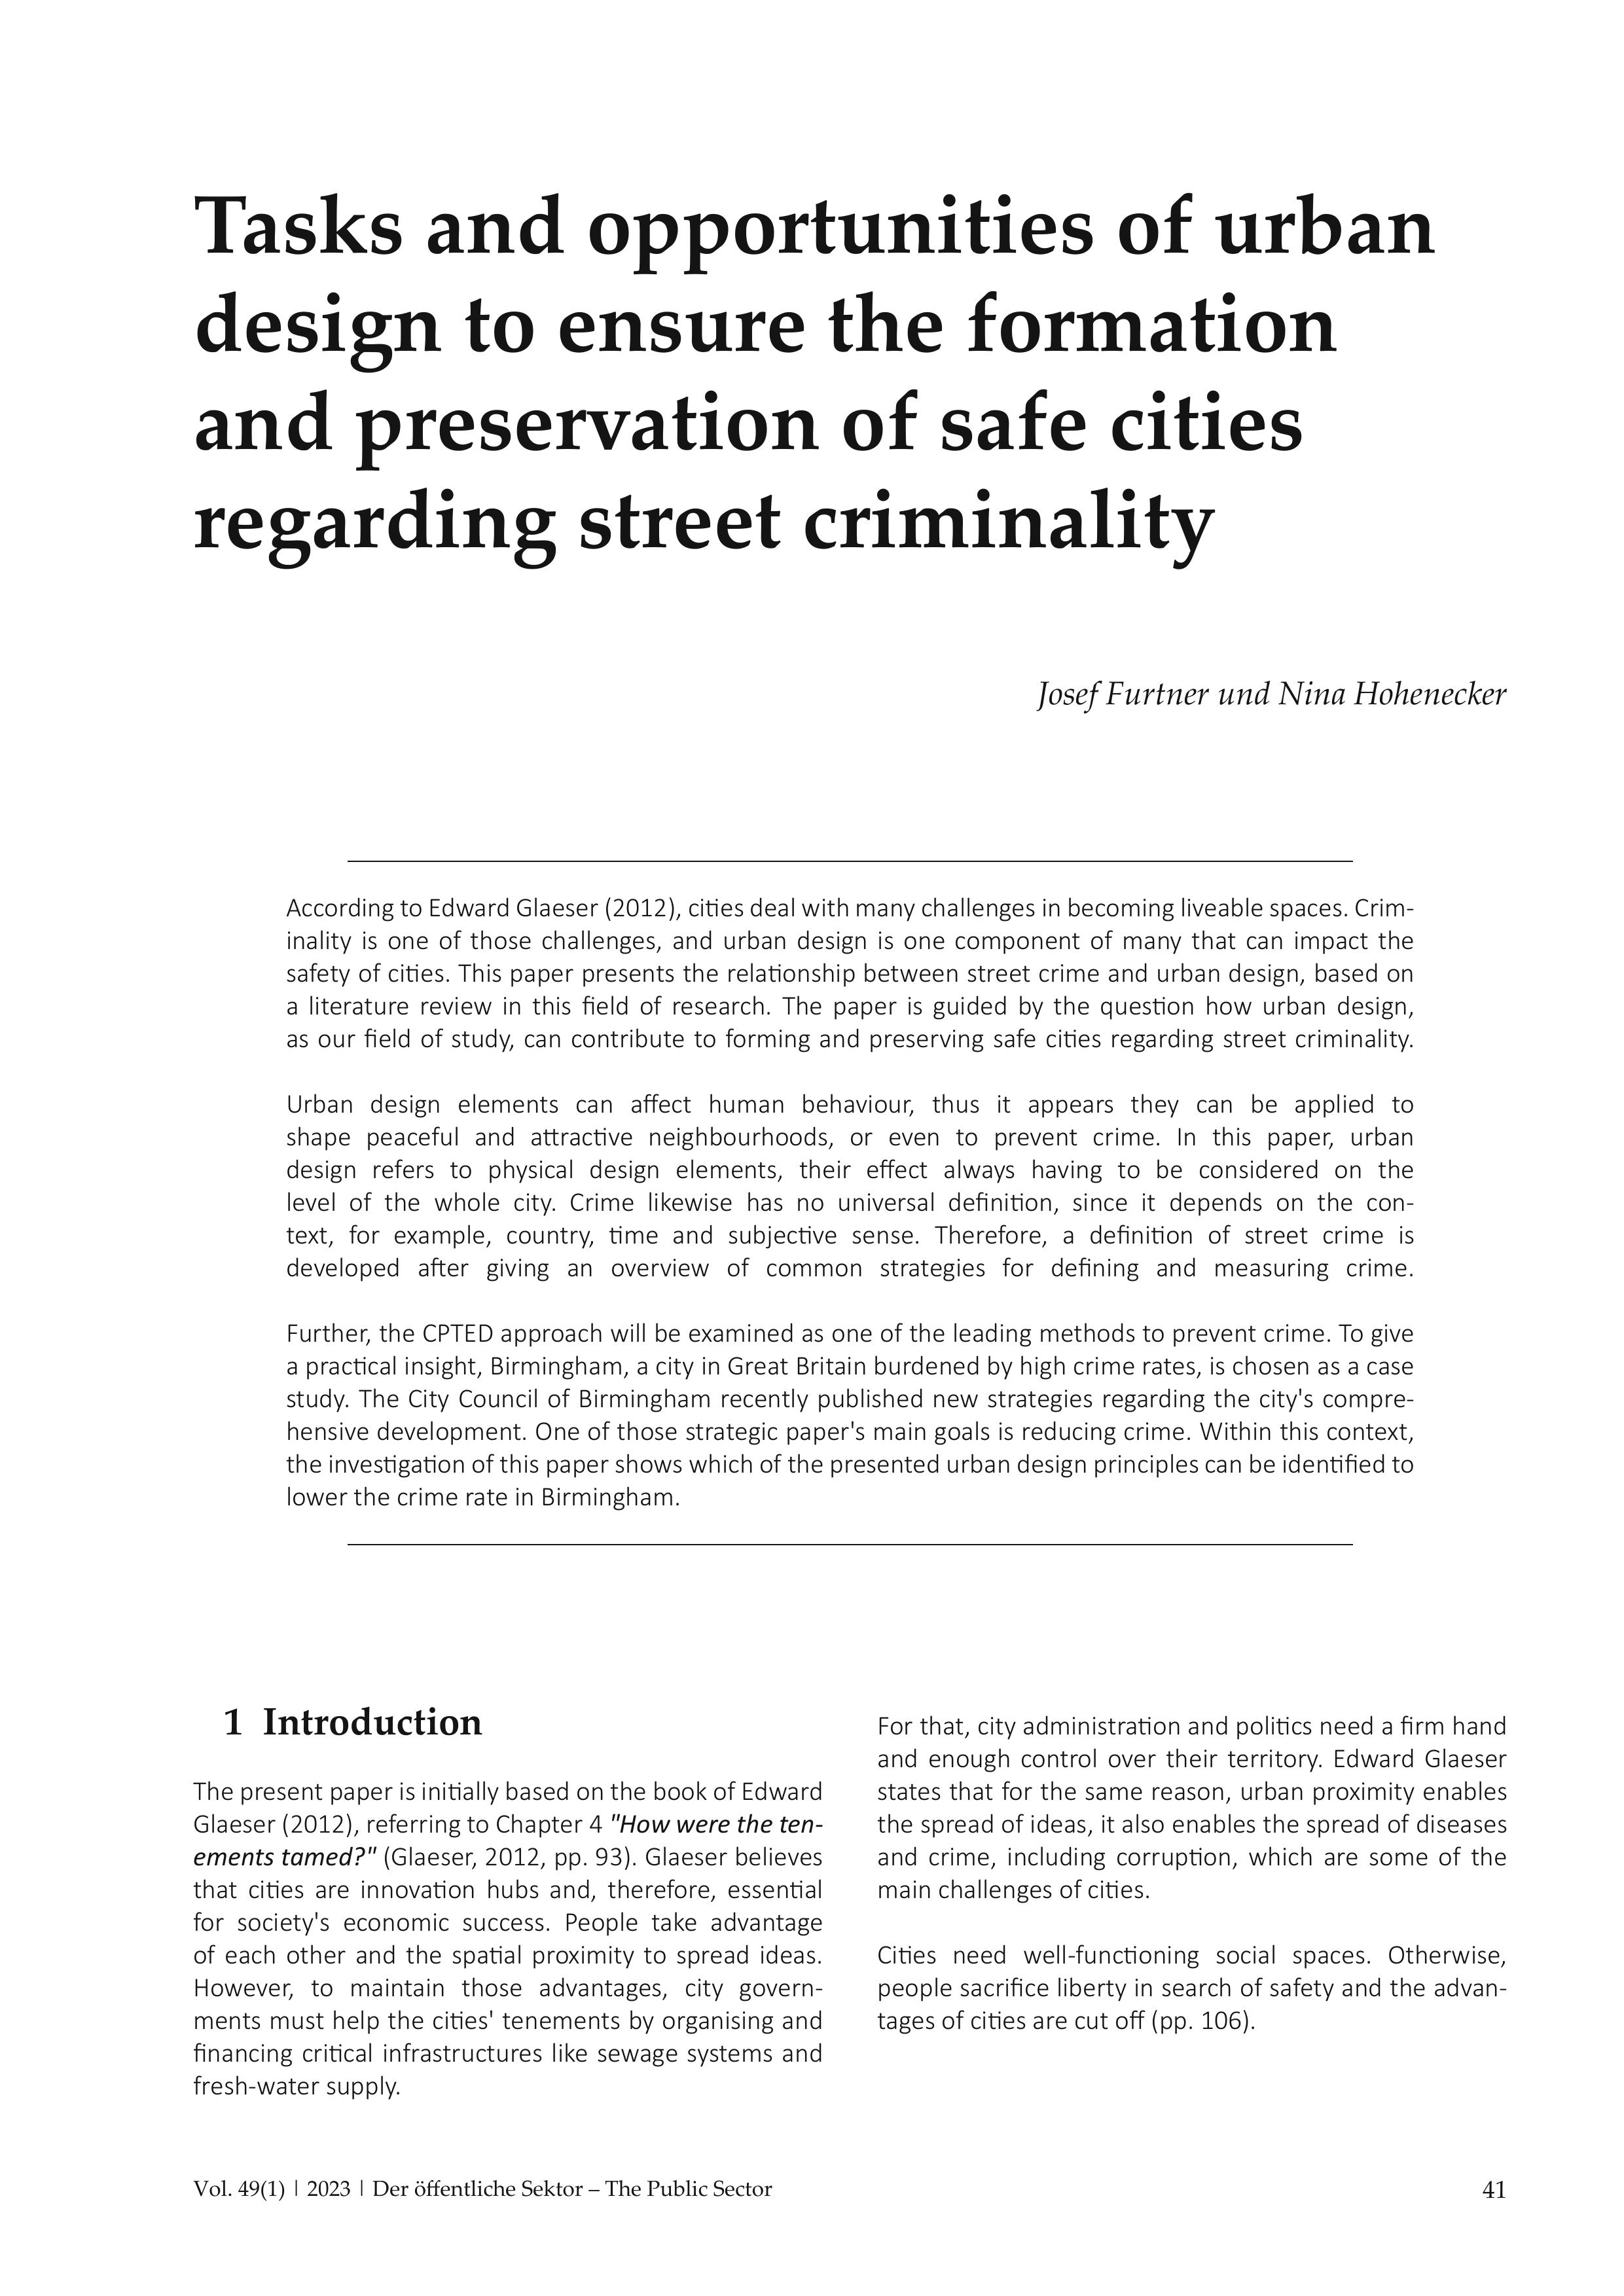 Tasks and opportunities of urban design to ensure the formation and preservation of safe cities regarding street criminality